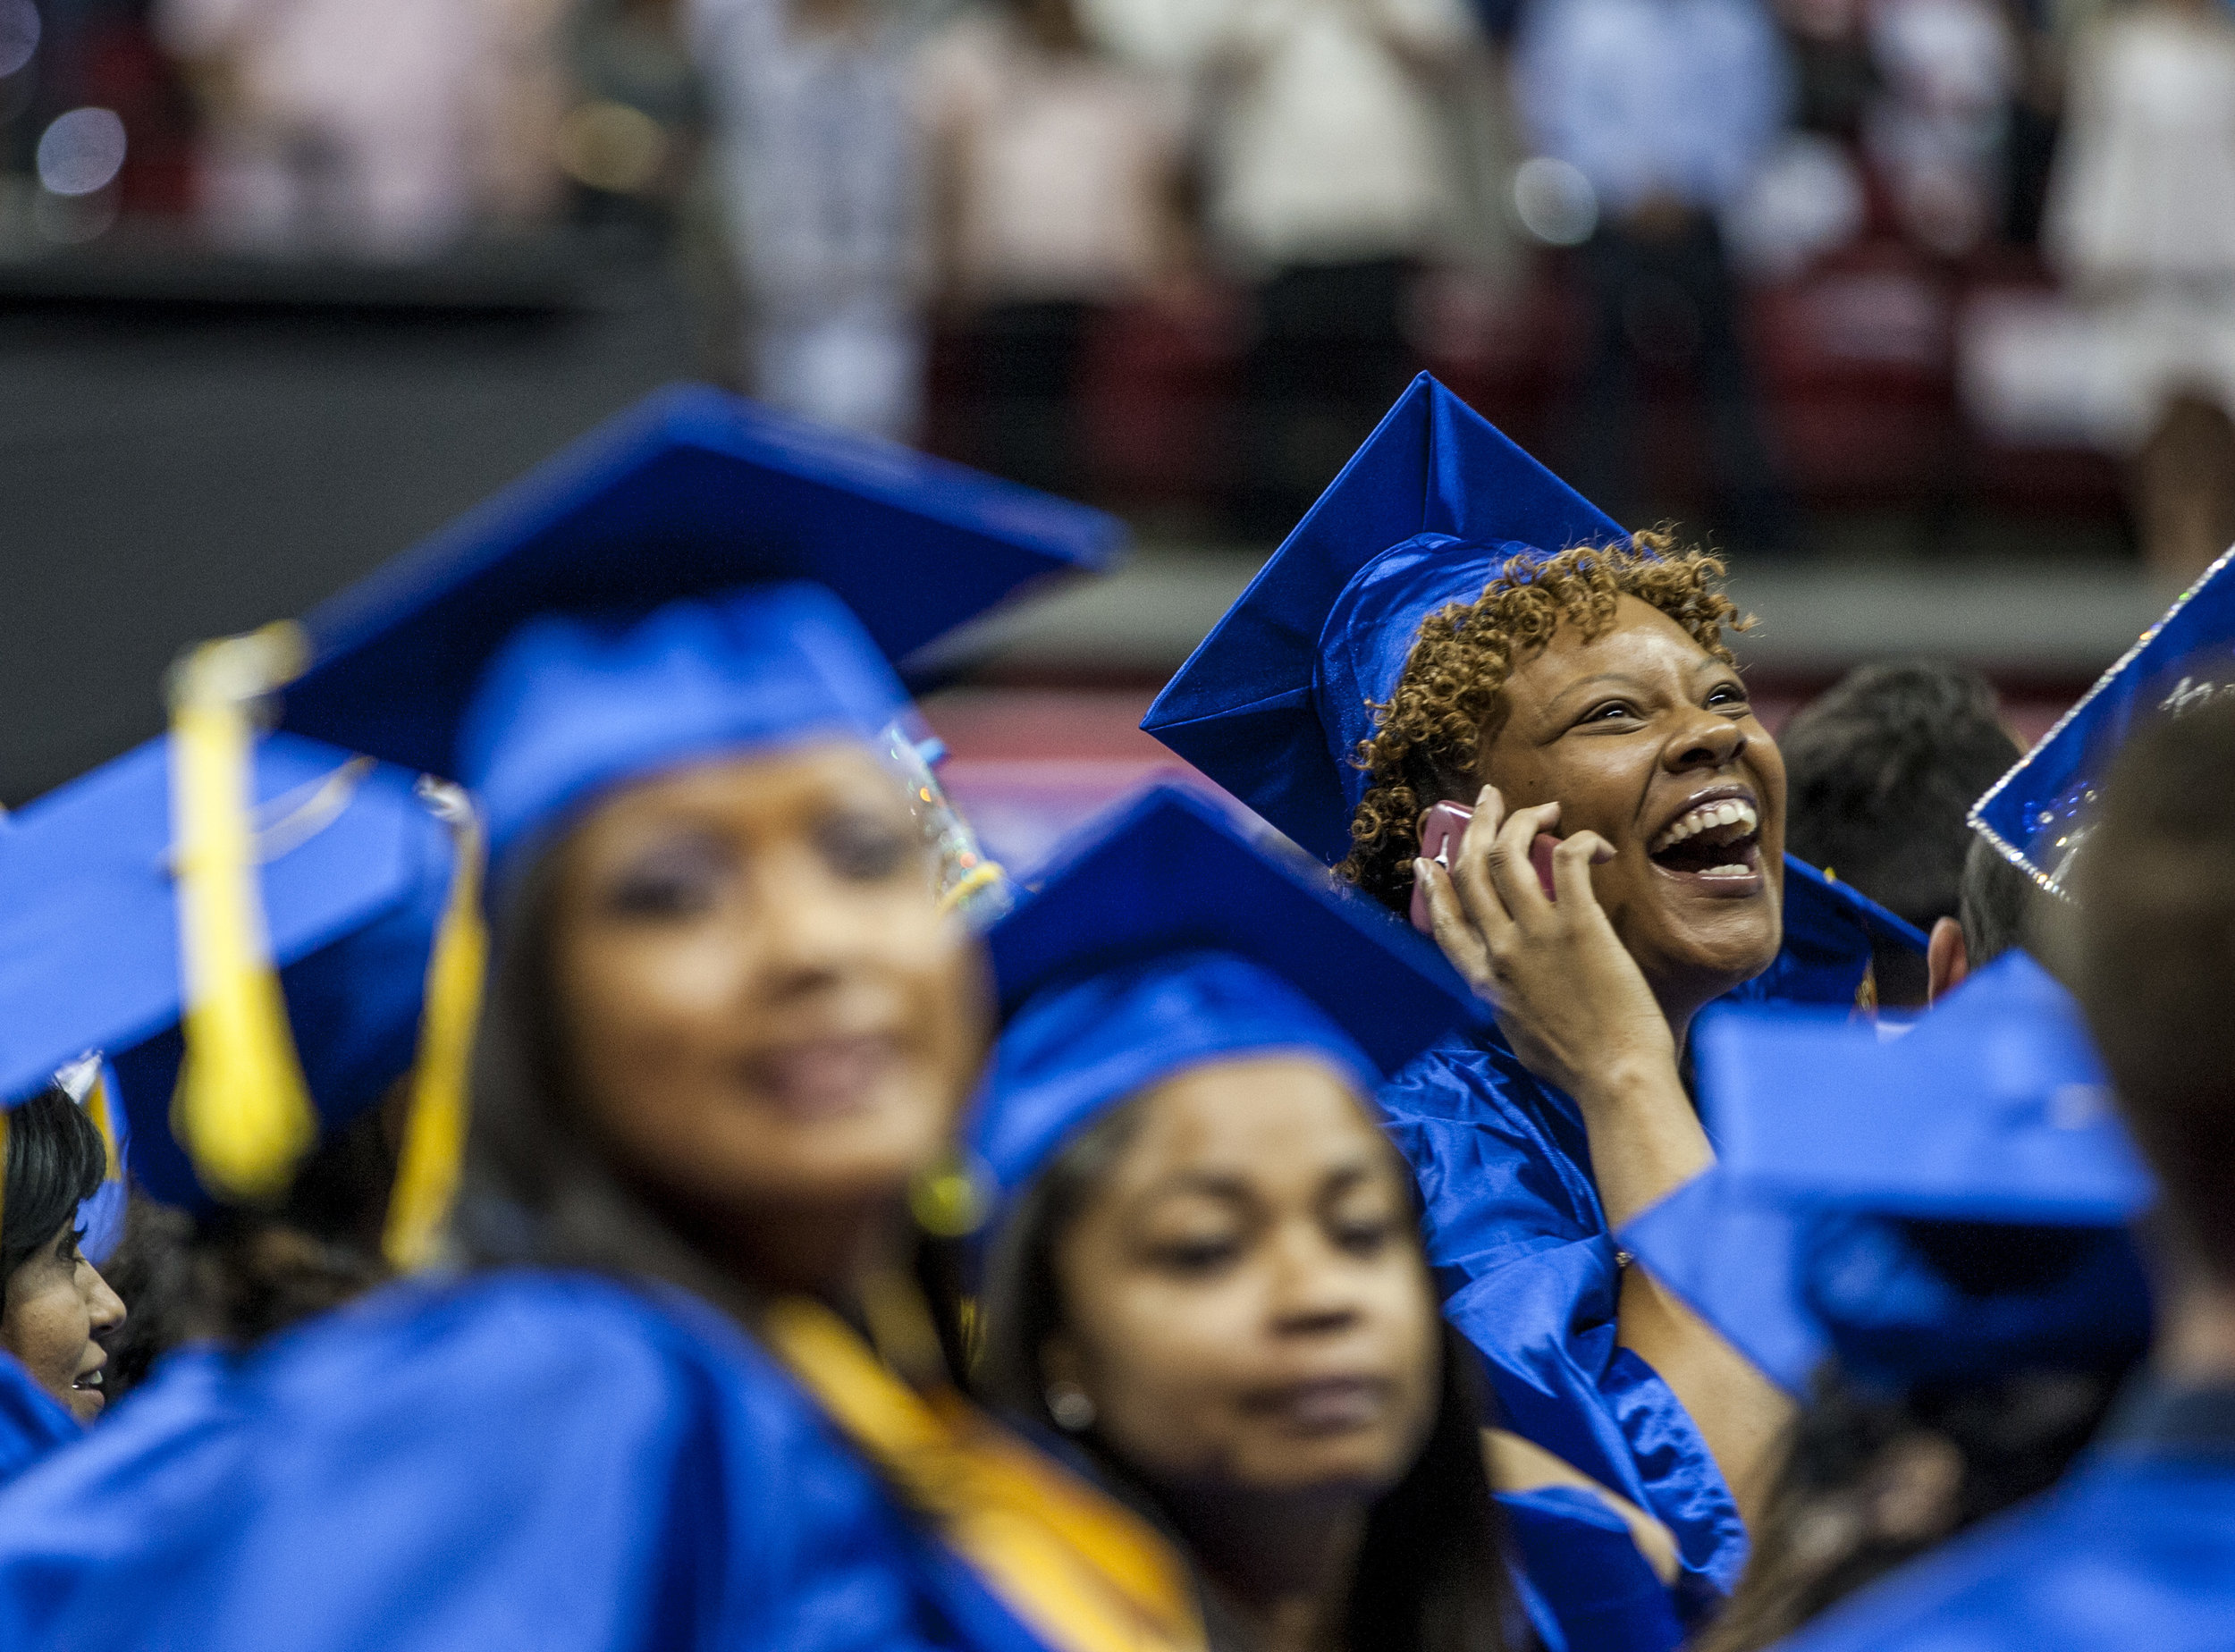  A College of Southern Nevada graduate talks with an audience member on the phone before the start of commencement at the Thomas and Mack Center in Las Vegas on Monday, May 15, 2017. 